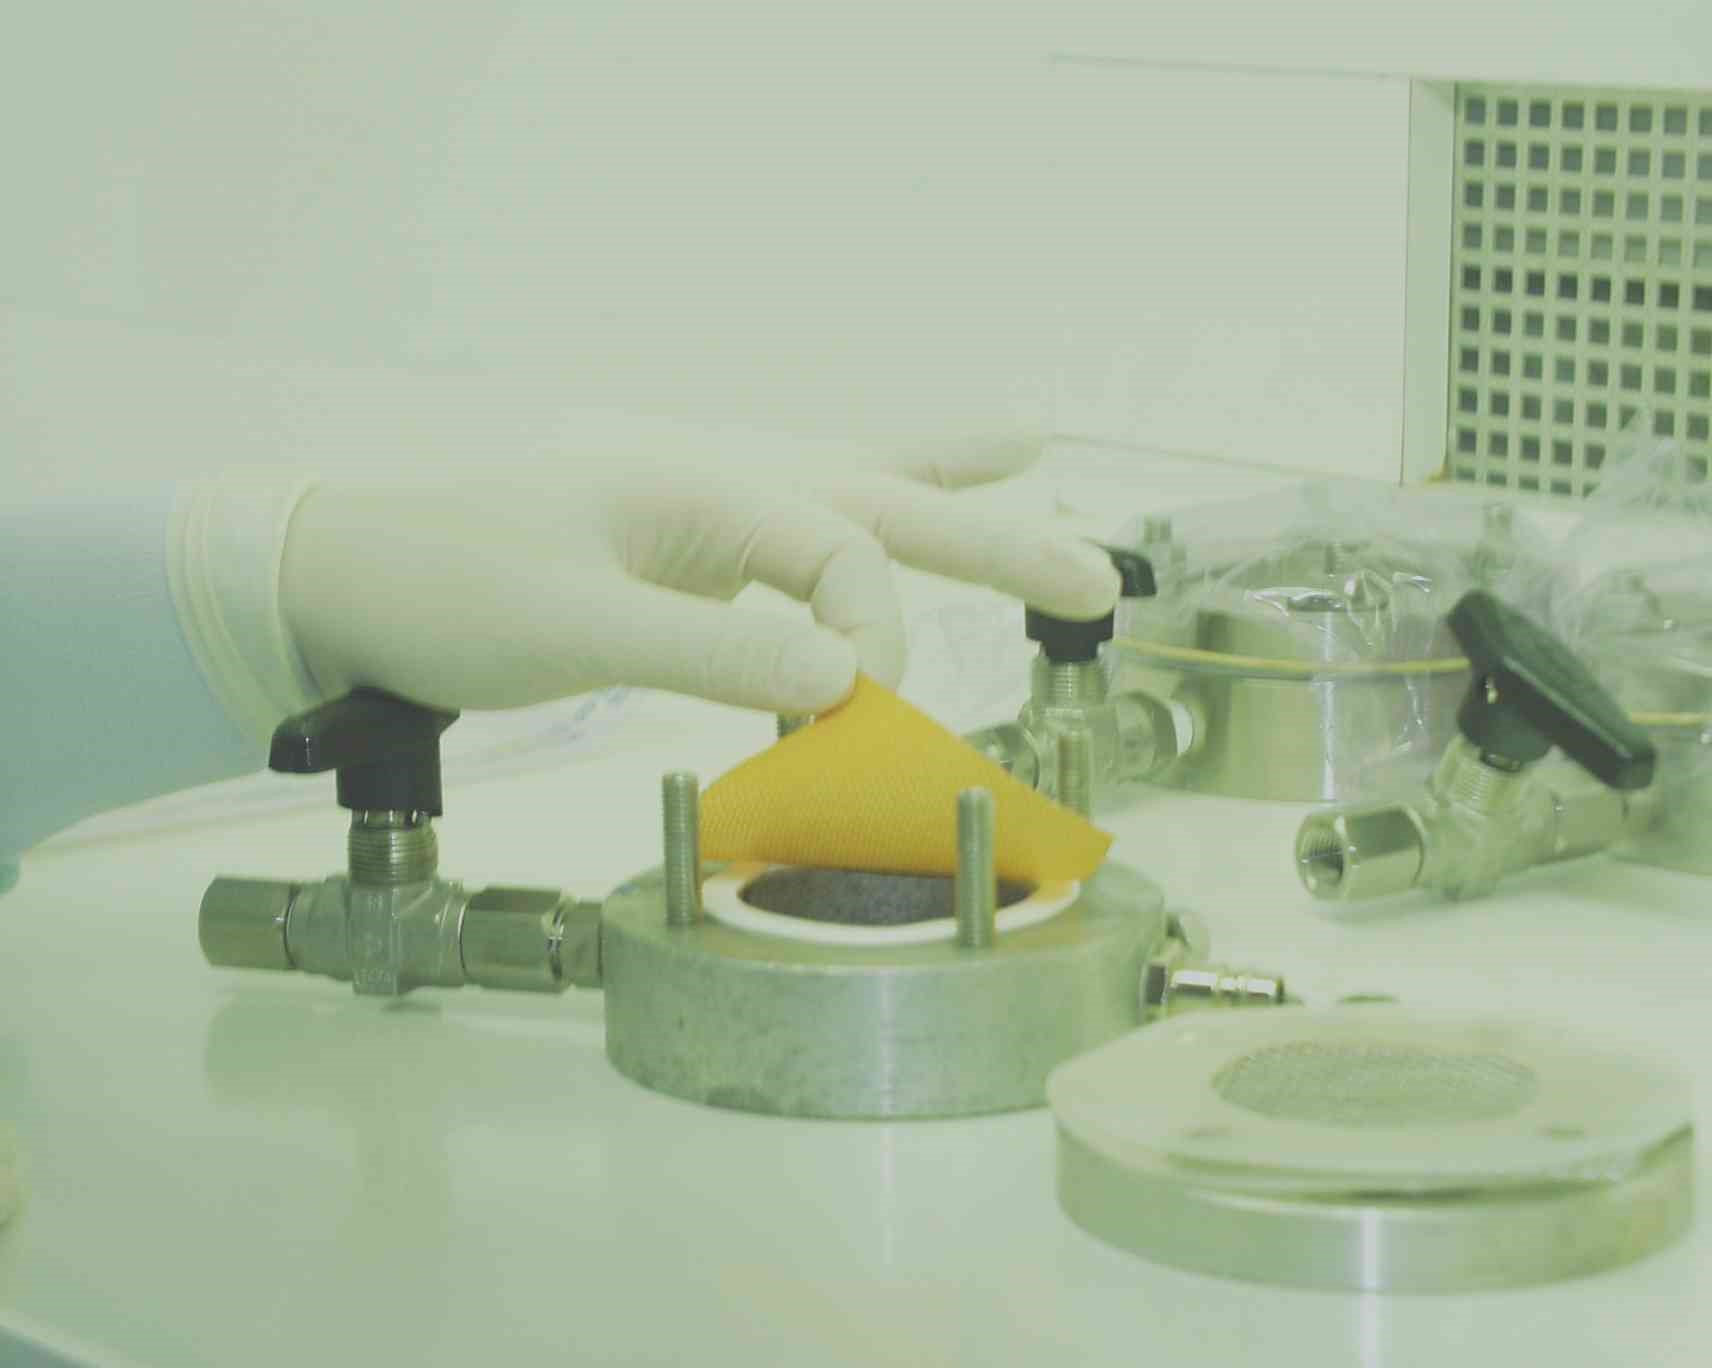 Sample of disposable glove placed in a viral penetration test cell